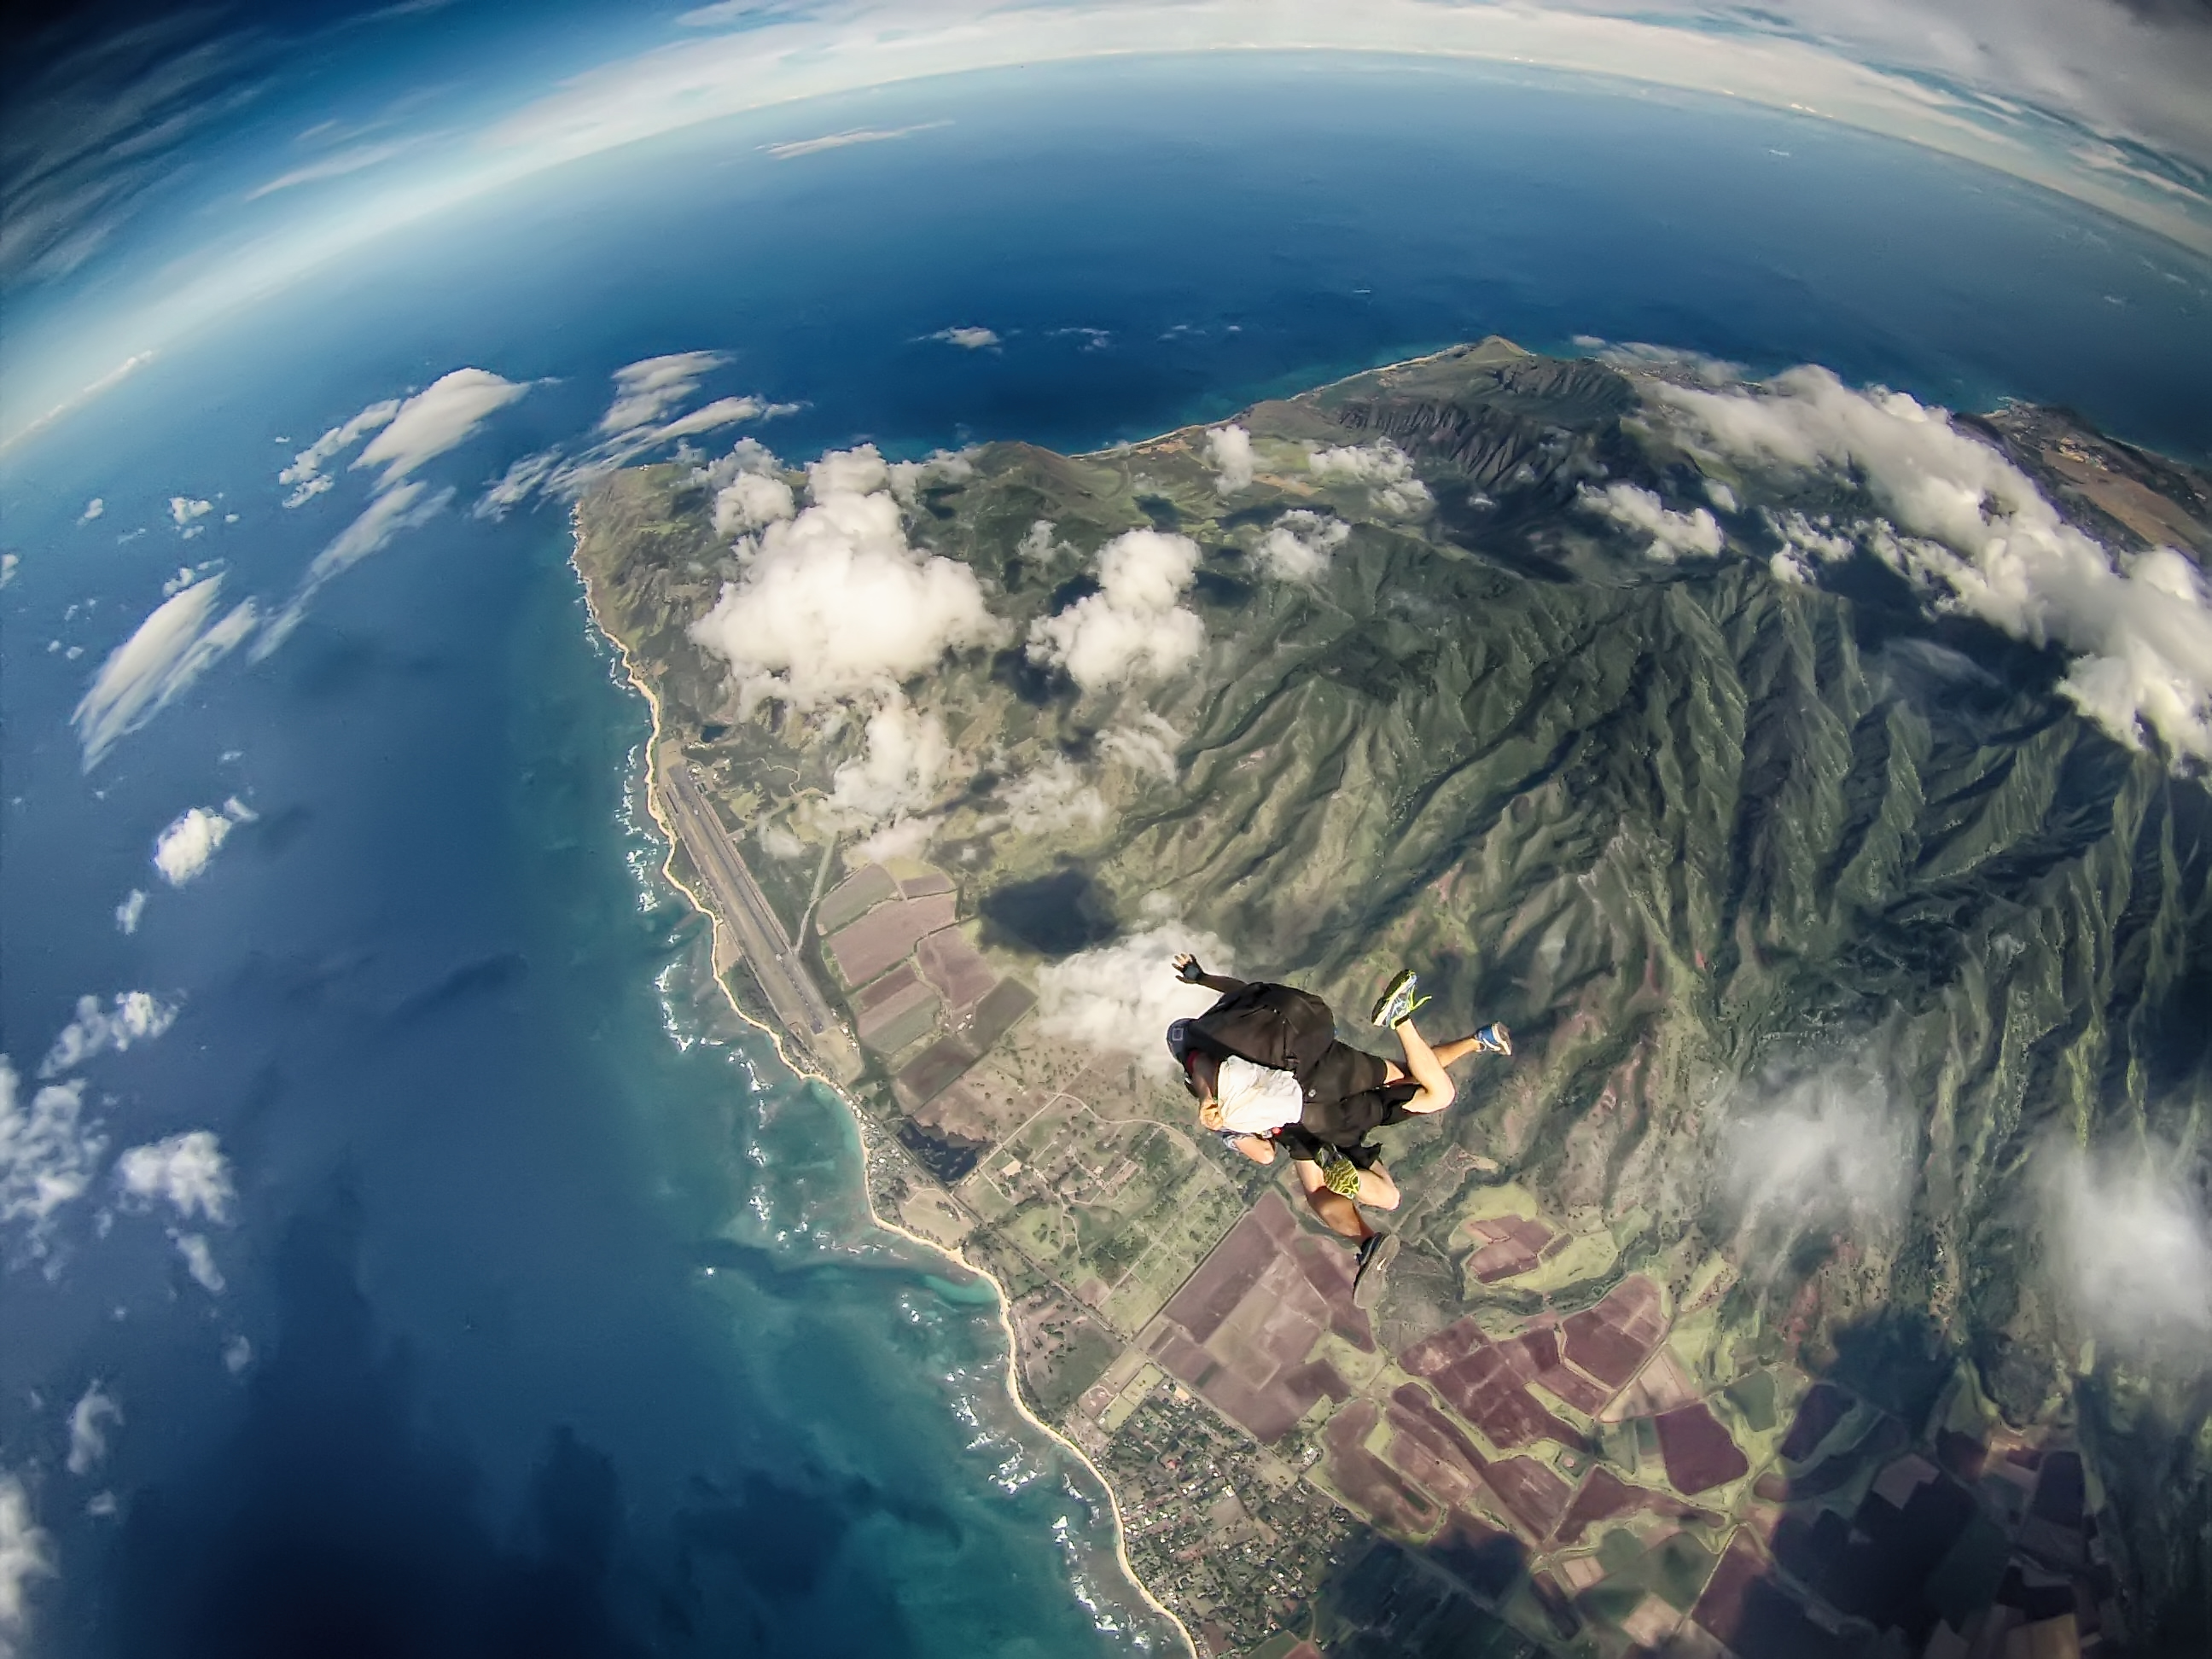 Pacific Skydiving Hawaii VI by StevenZybert on DeviantArt